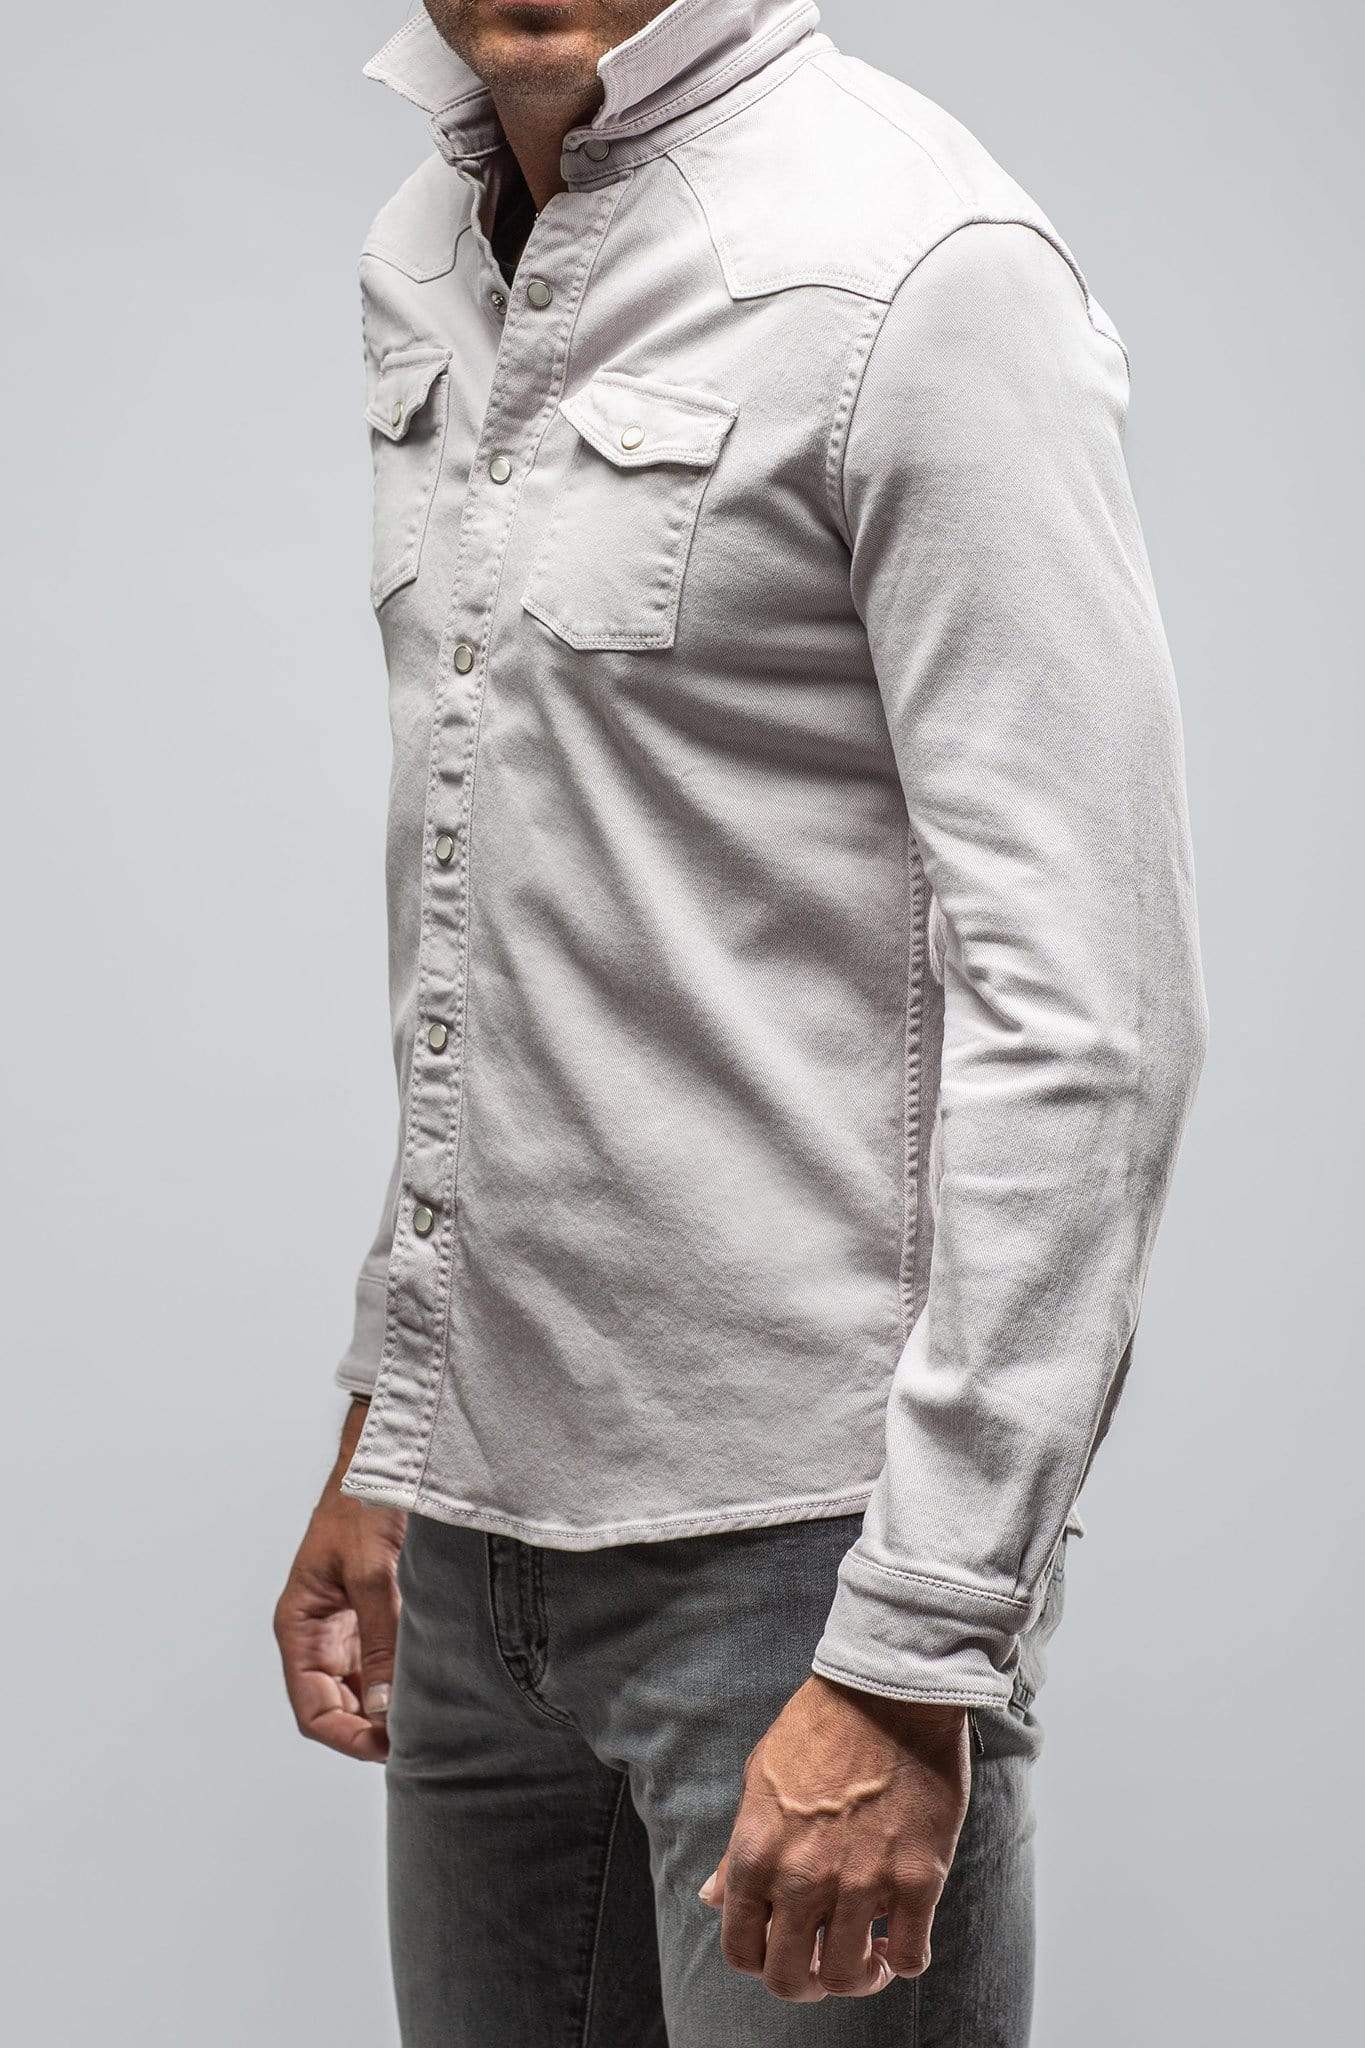 Ranger Colored Denim Snap Shirt In Hickory Root - AXEL'S